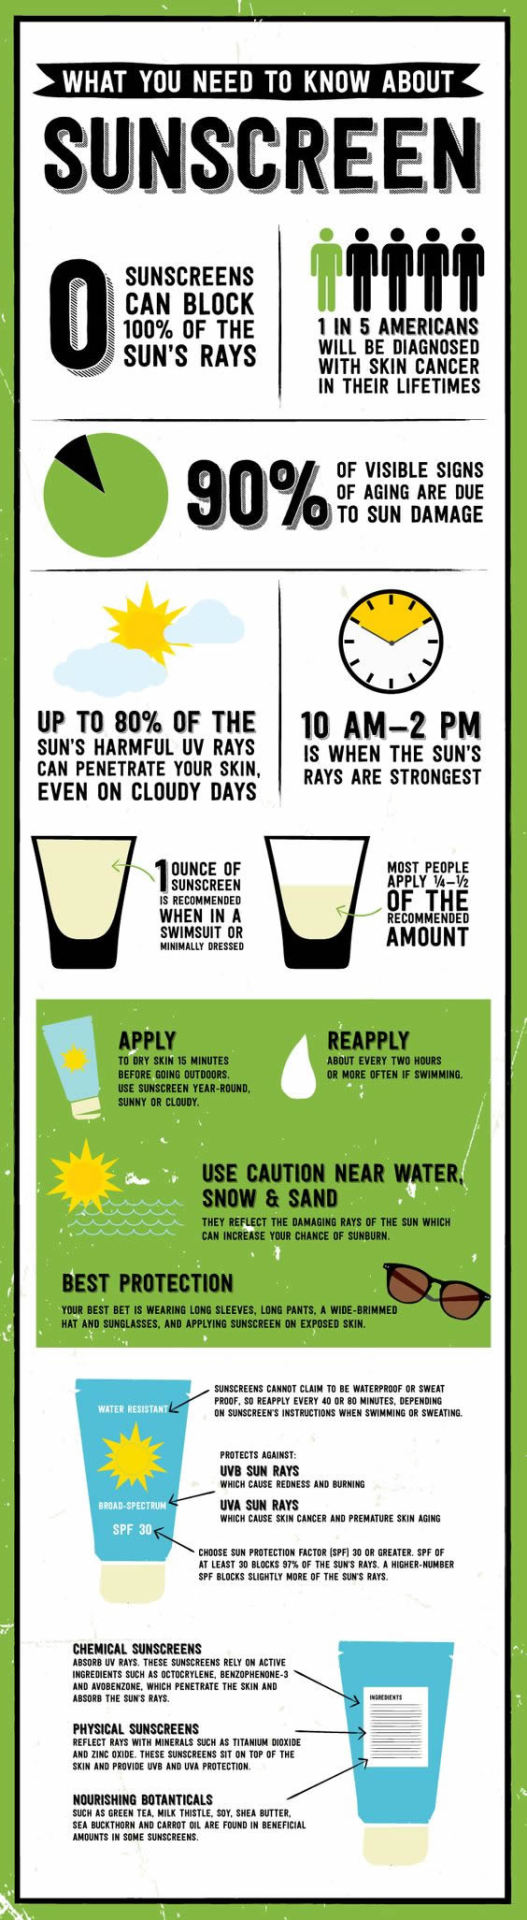 Sunscreen infographic